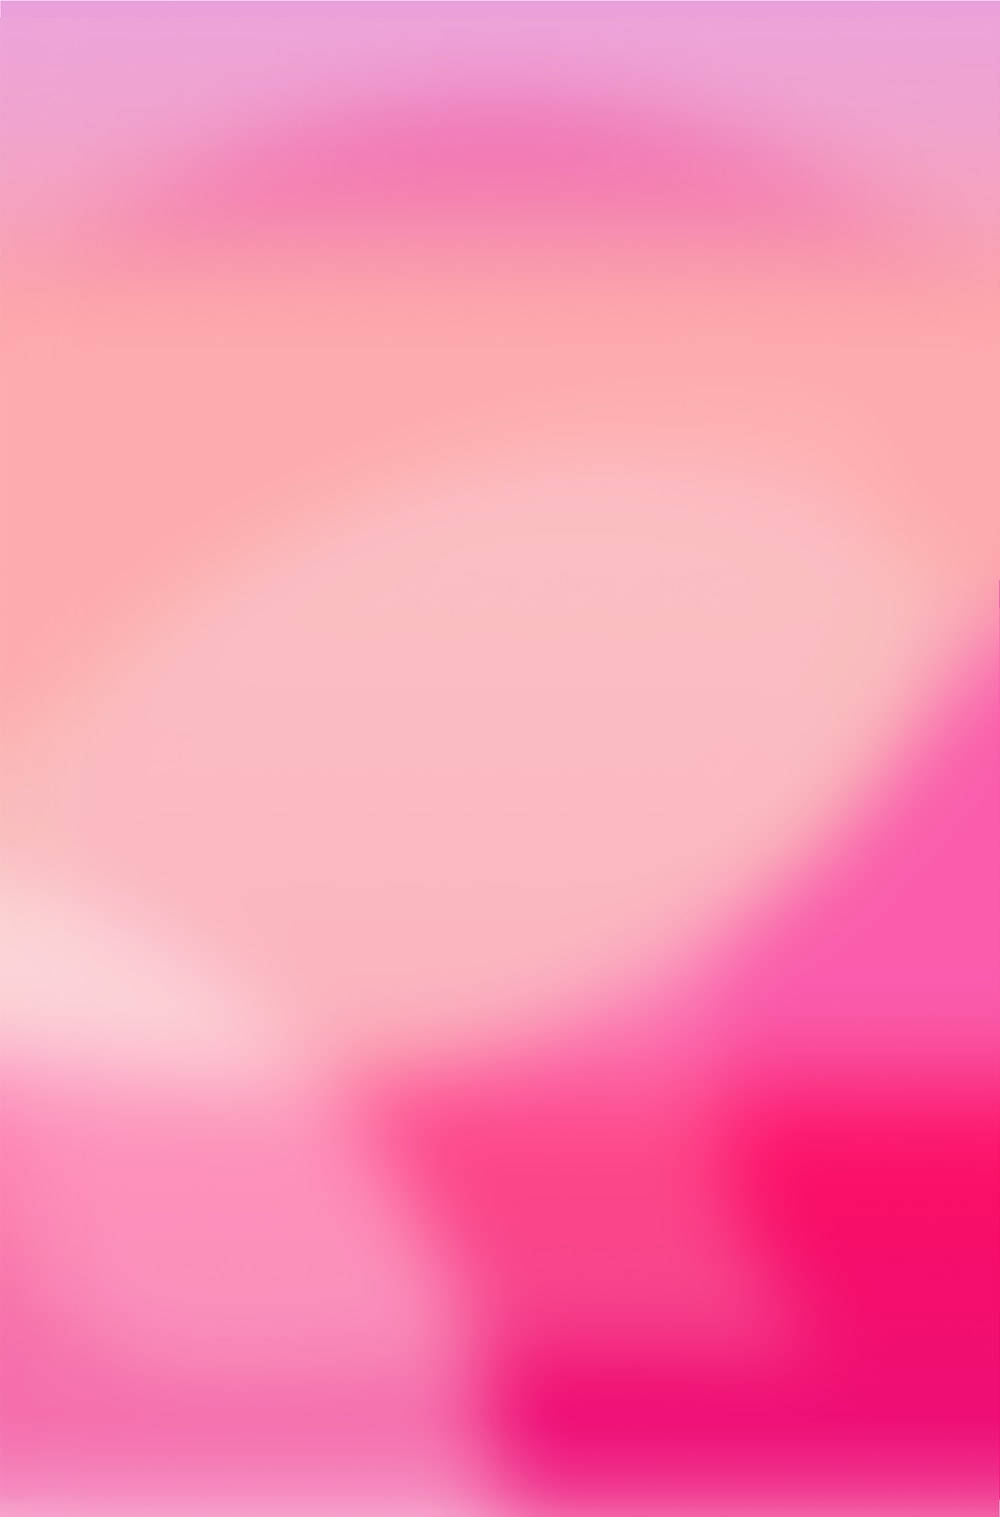 Abstract Plain Pink Watercolor Background